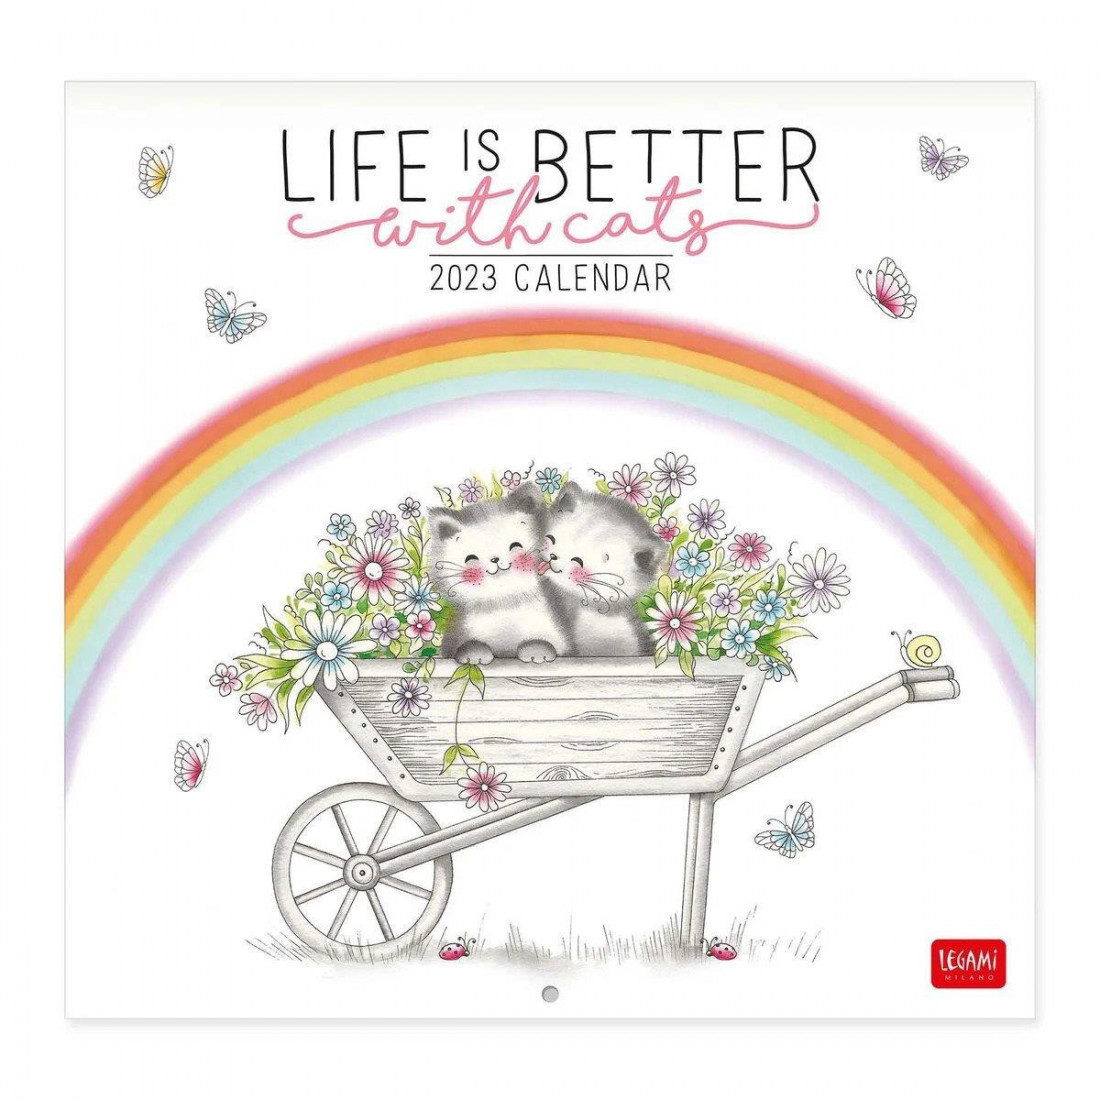 Legami Wall Calendar 2023 the life is better with cats 30 x 29 cm